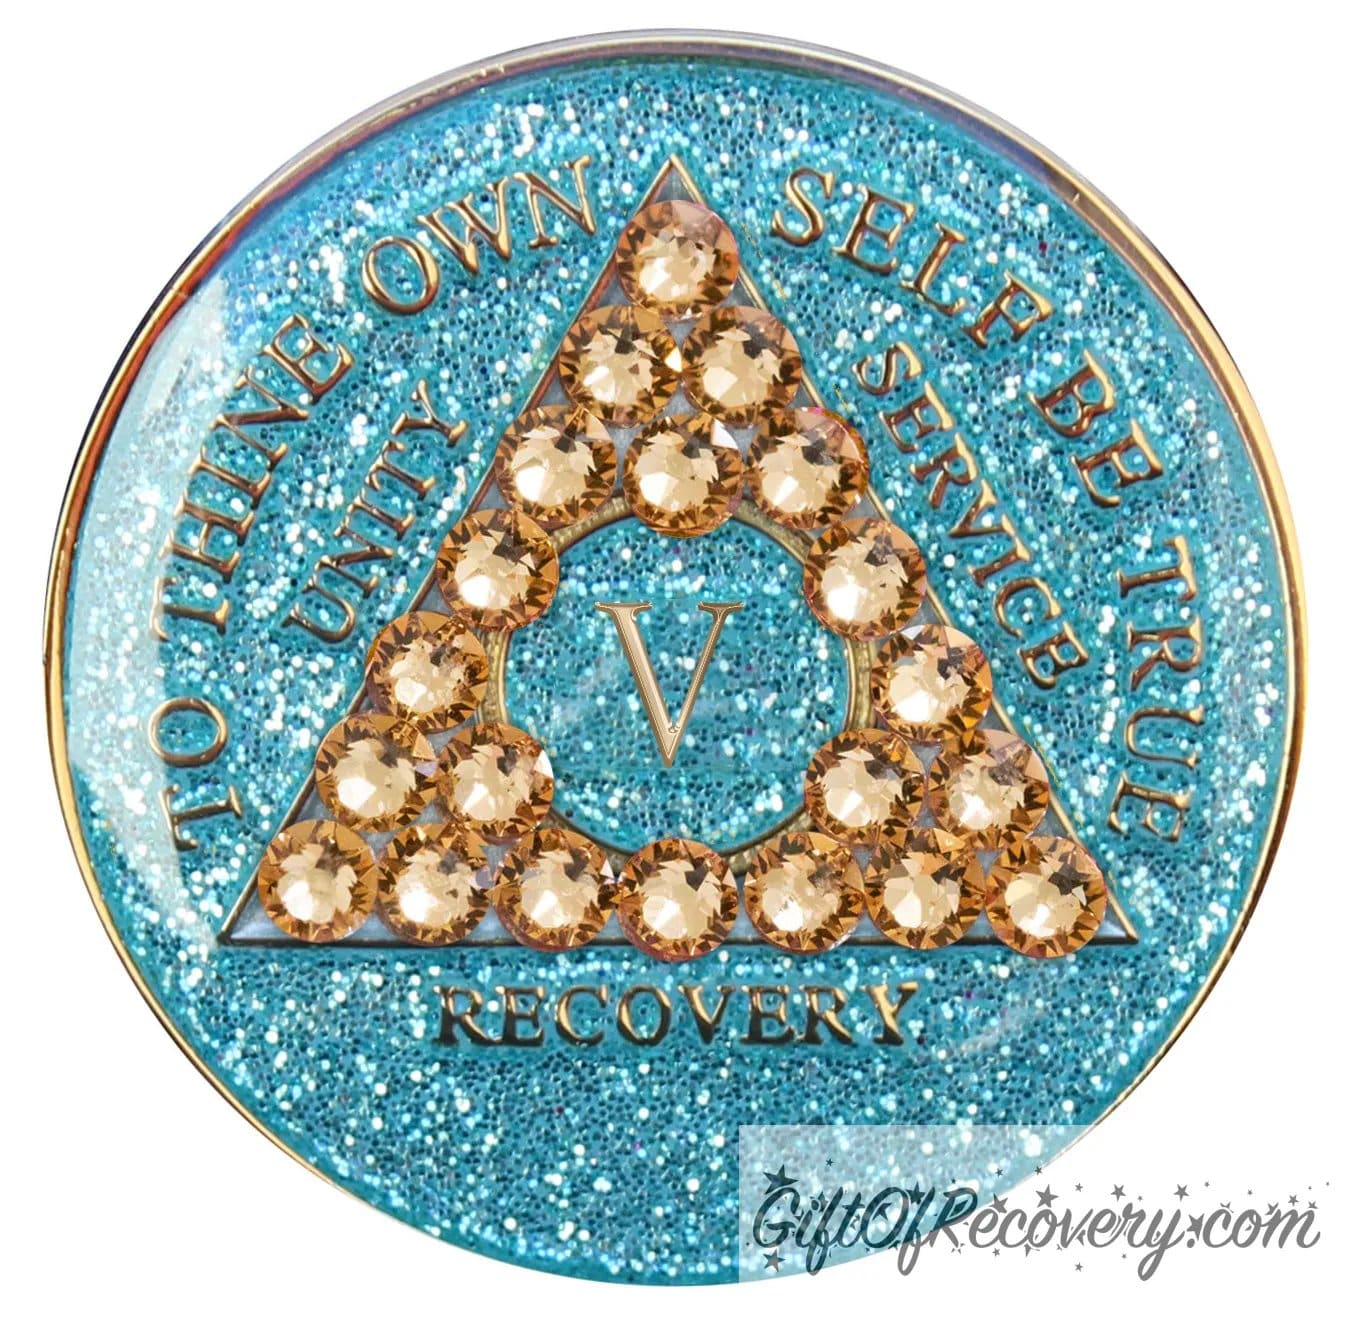 5 year Aqua glitter AA medallion with 21 gold genuine crystal making a triangle in the center, and to thine own self be true, unity, service, recovery, the roman numeral in the center and the rim of the recovery medallion embossed in 14k gold plated brass and sealed with resin for a glossy shine.